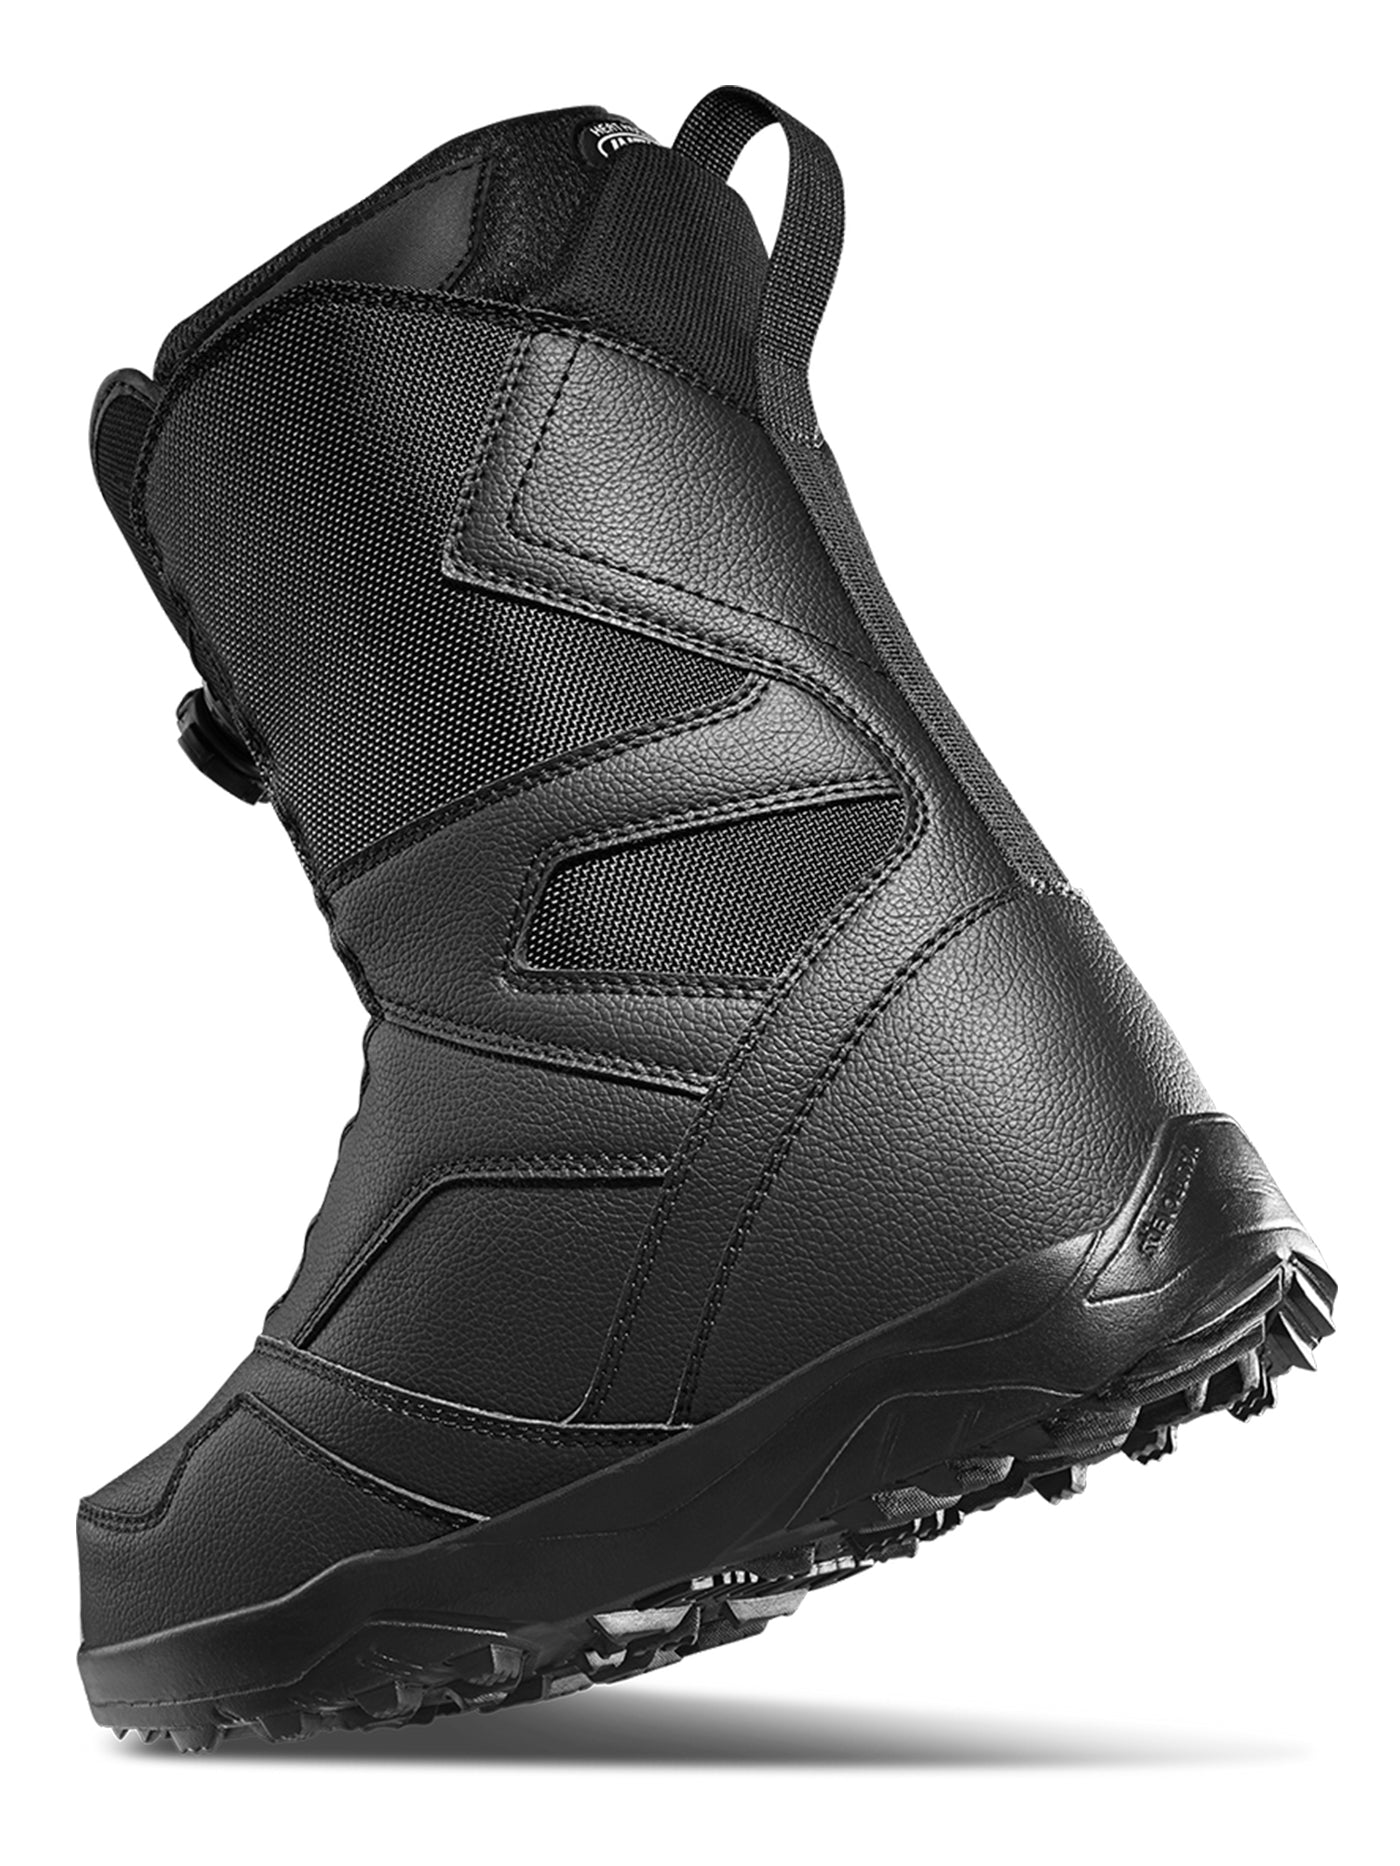 ThirtyTwo STW Double BOA Snowboard Boots 2025